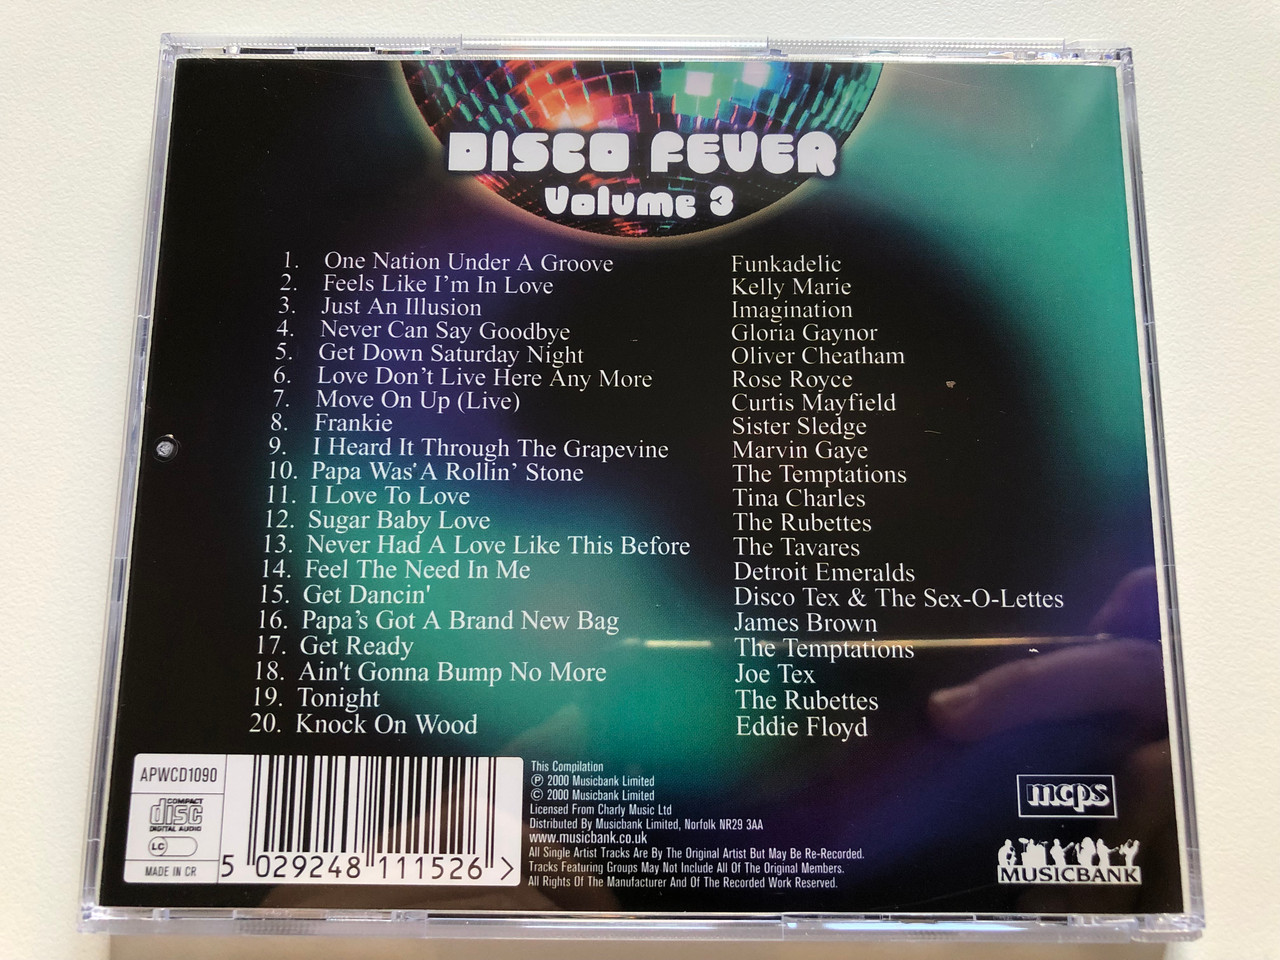 https://cdn10.bigcommerce.com/s-62bdpkt7pb/products/0/images/190447/Disco_Fever_Volume_3_Original_Artists_Imagination_-_Just_An_Illusion_Sister_Sledge_-_Frankie_Rose_Royce_-_Love_Dont_Live_Here_Any_More_Tina_Charles_-_I_Love_To_Love_and_many_more_M_5__59169.1631007098.1280.1280.JPG?c=2&_gl=1*y7lcnt*_ga*MjA2NTIxMjE2MC4xNTkwNTEyNTMy*_ga_WS2VZYPC6G*MTYzMTAwNDEzMS42Ny4xLjE2MzEwMDY4NTIuMjE.